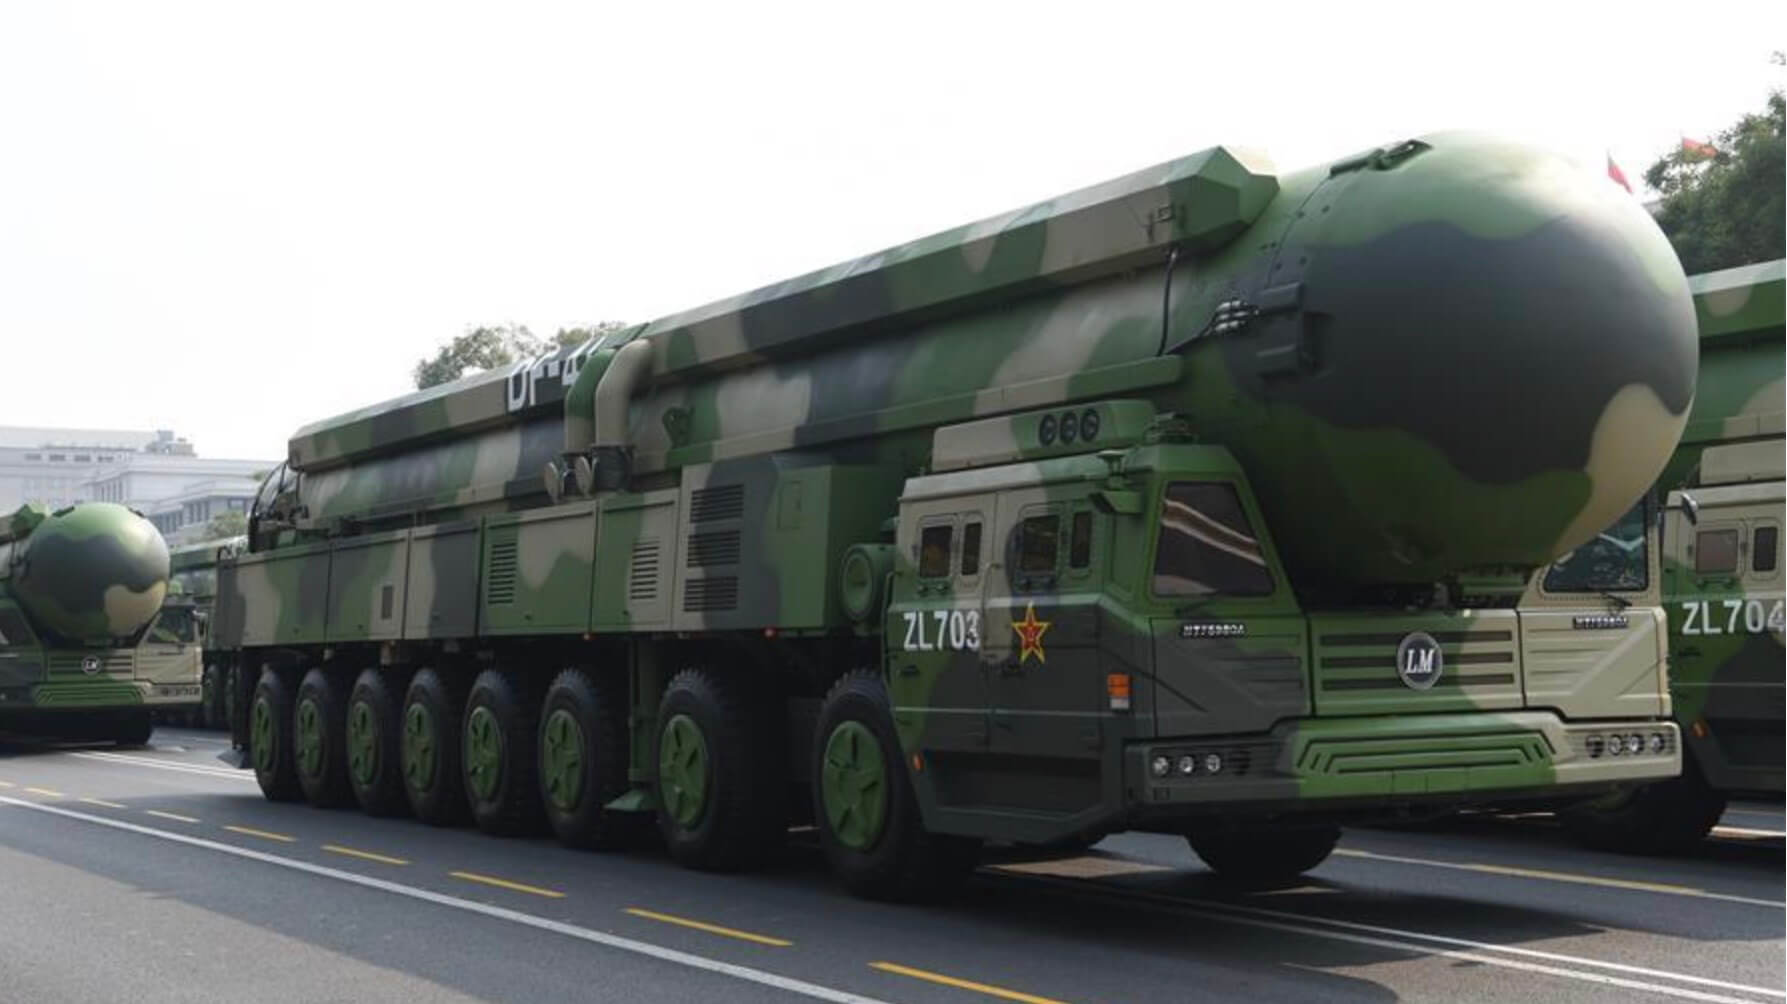 The inexorable rise of China: a 40% expansion of its nuclear arsenal in four years.